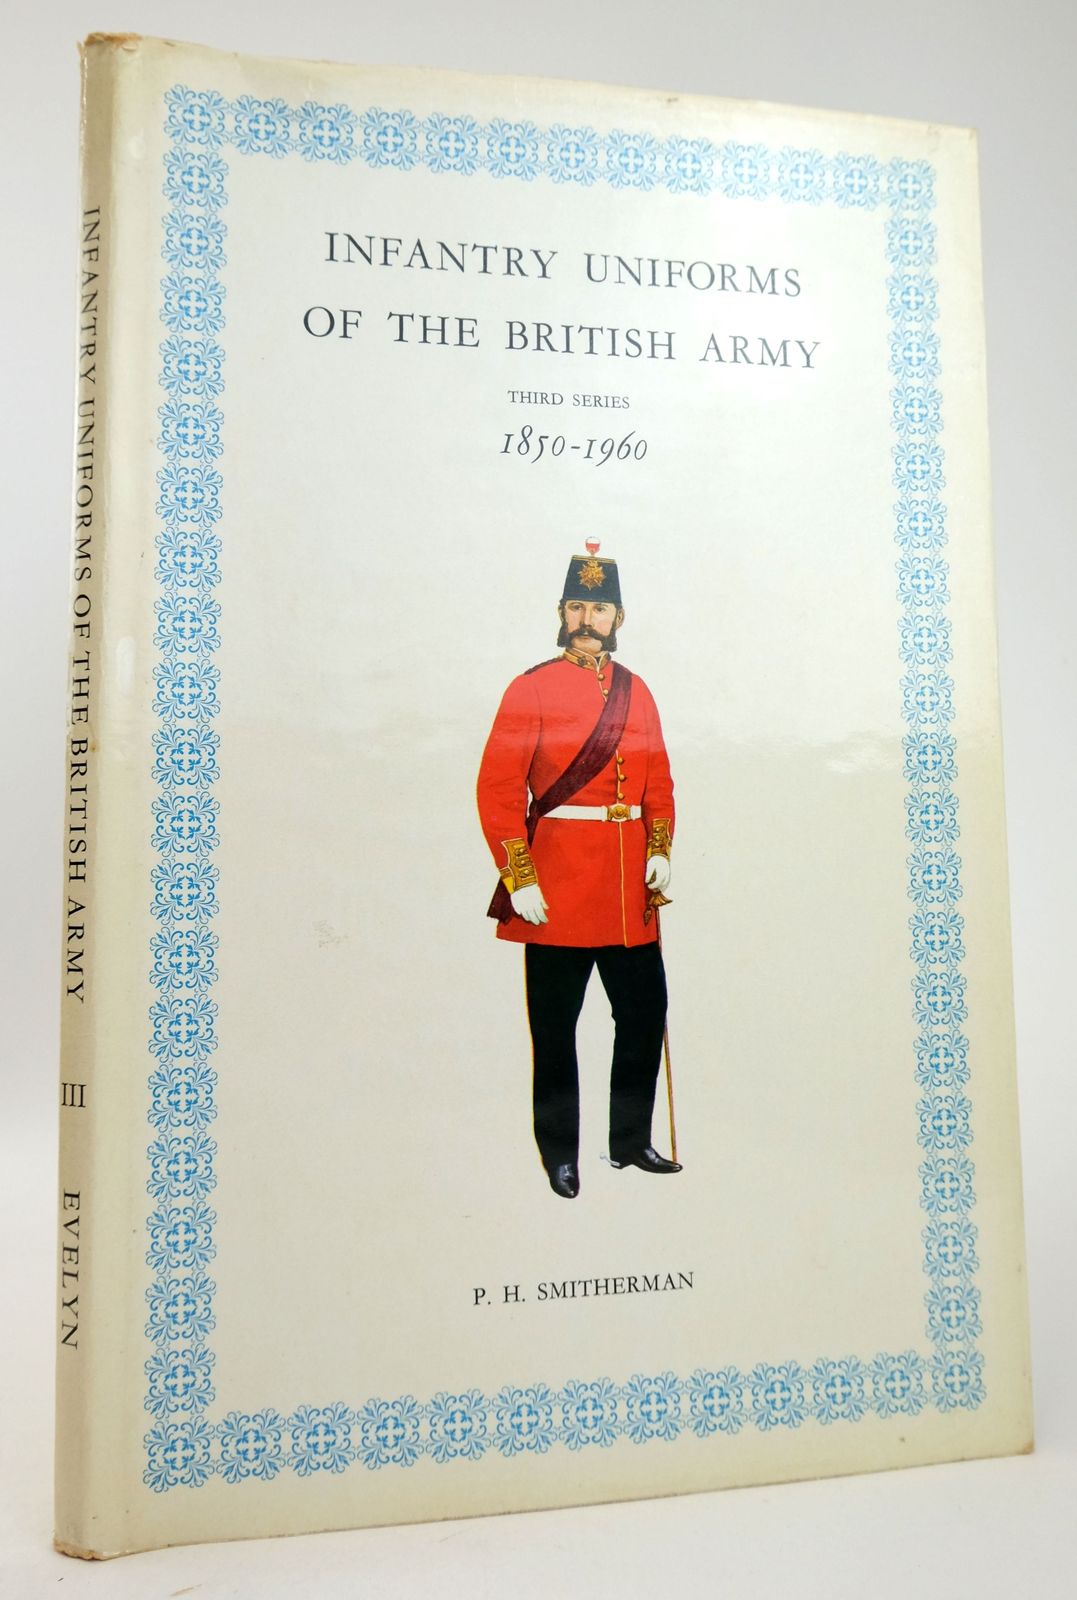 Photo of INFANTRY UNIFORMS OF THE BRITISH ARMY 1850-1960 written by Smitherman, P.H. illustrated by Smitherman, P.H. published by Hugh Evelyn (STOCK CODE: 1819976)  for sale by Stella & Rose's Books